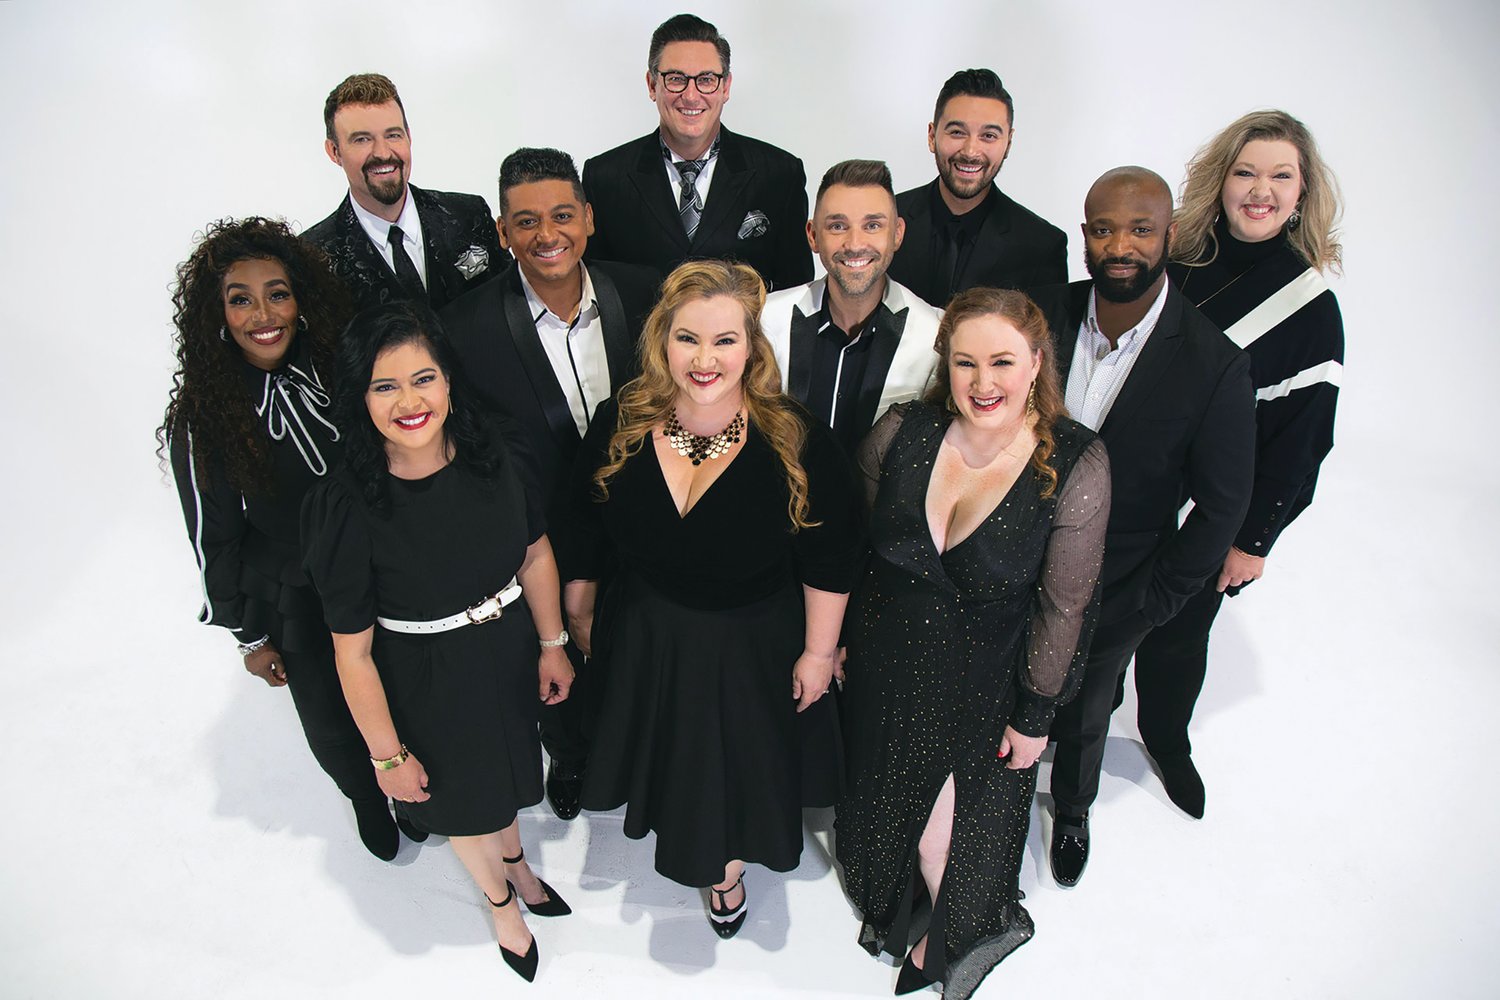 The a cappella group Vocative will be at Wayne State College on Feb. 22.